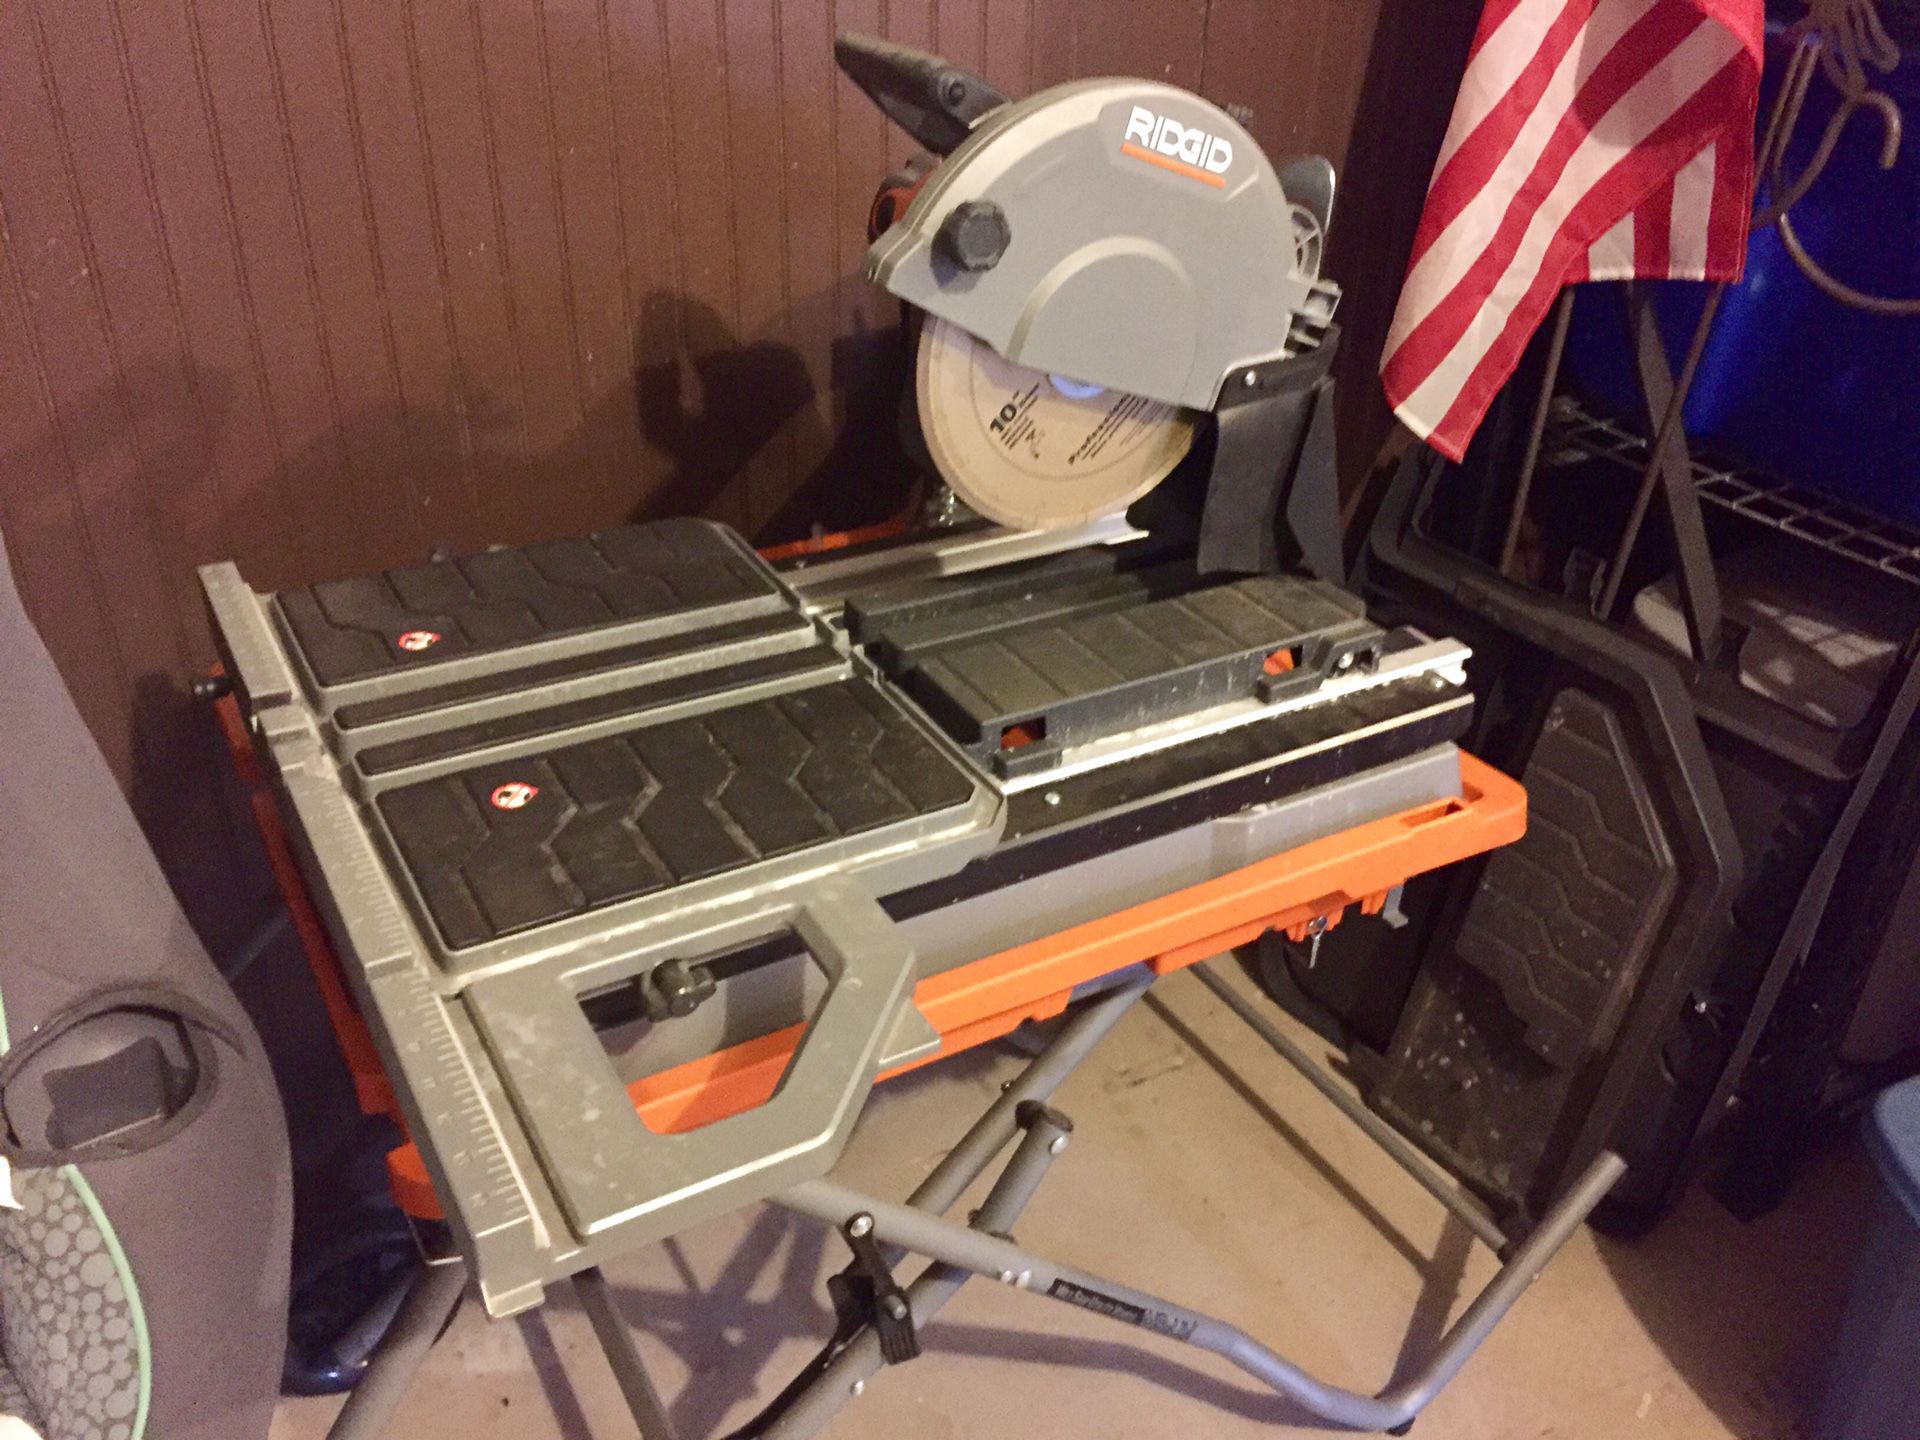 Like New 10” Rigid Commercial Grade Wet Tile Saw, Stand & A Bunch Of Masonry/Tile Tools - Excellent Condition!